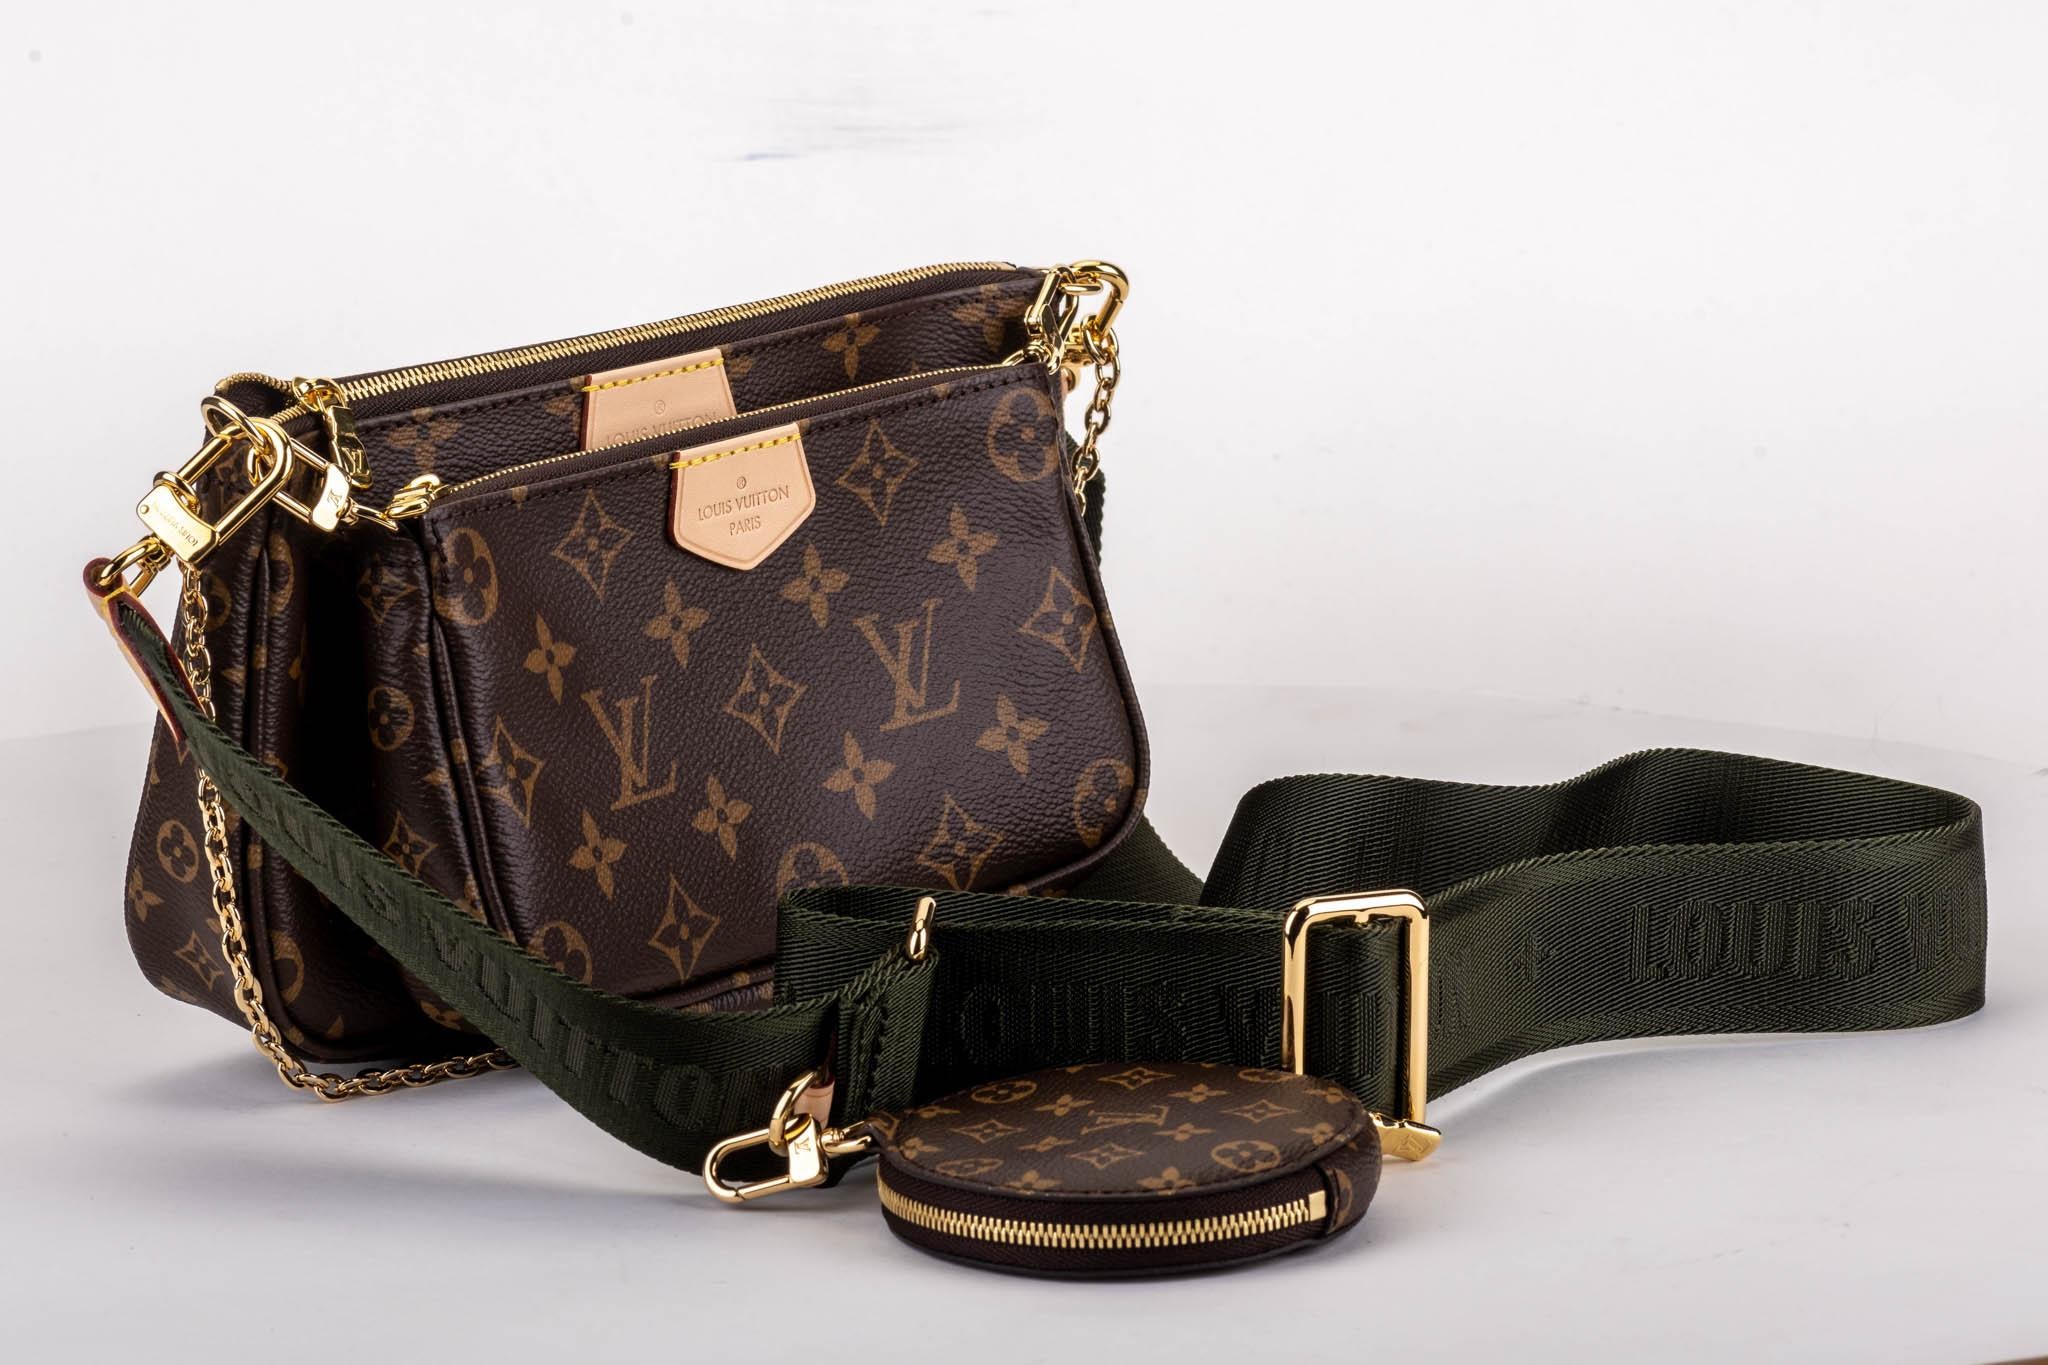 Vuitton hot season ticket multi pouches in coated monogram canvas and army green detail. Sold out worldwide . Composed of three detachable parts : crossbody, pochette and round coin purse. Adjustable strap. Comes with dust cover and original box.